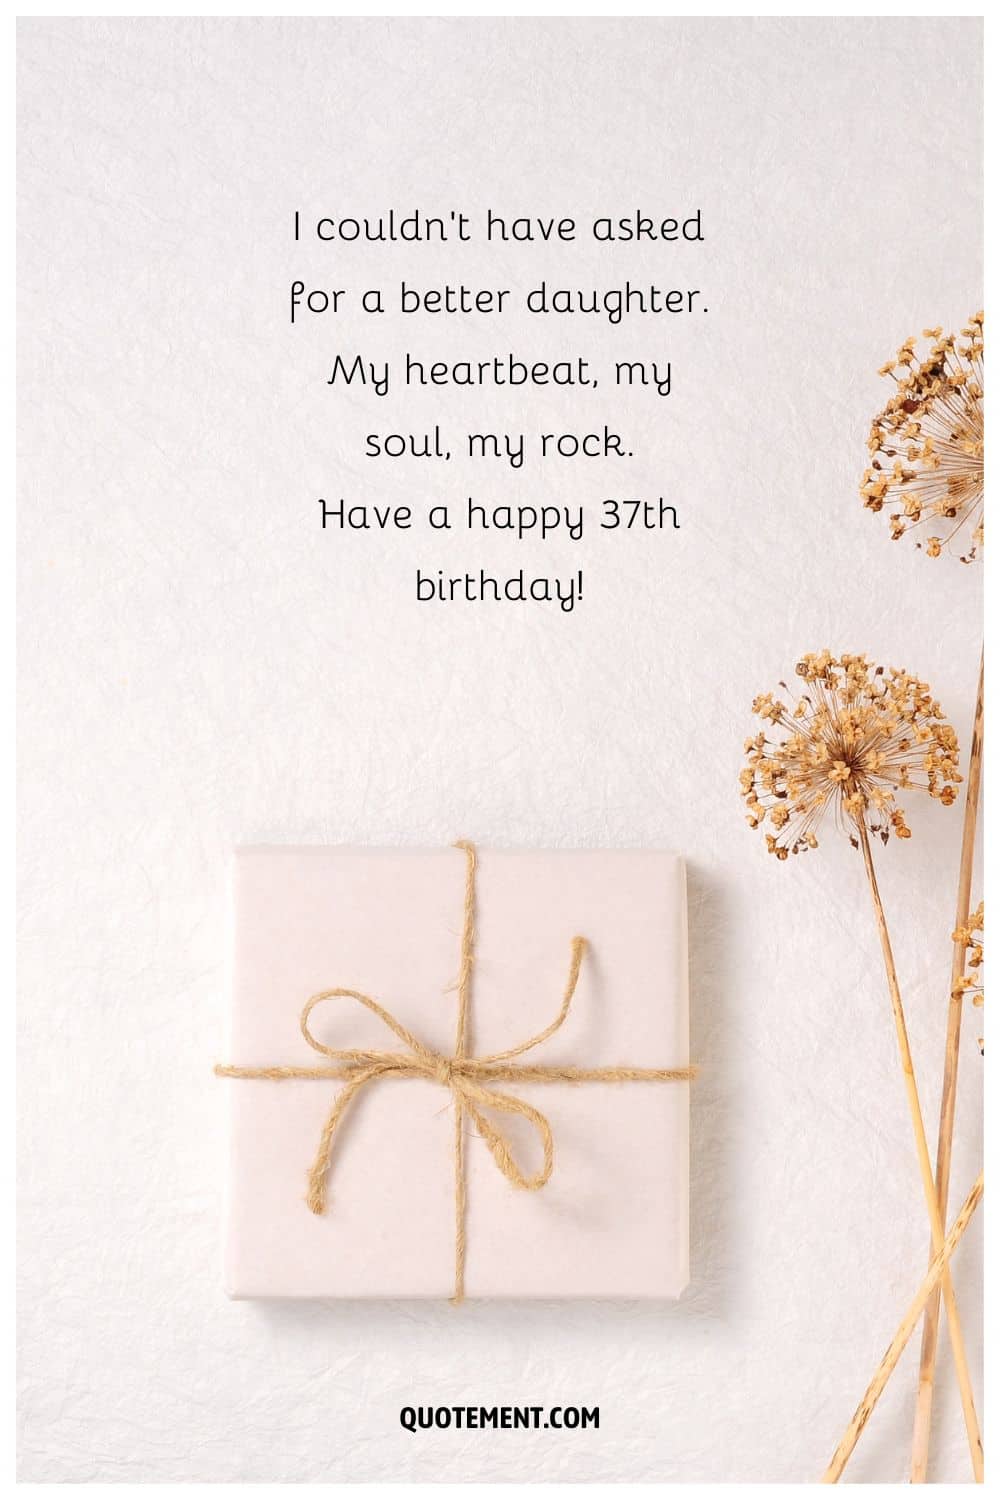 Birthday message for a daughter's 37th birthday and a gift and dried flowers.